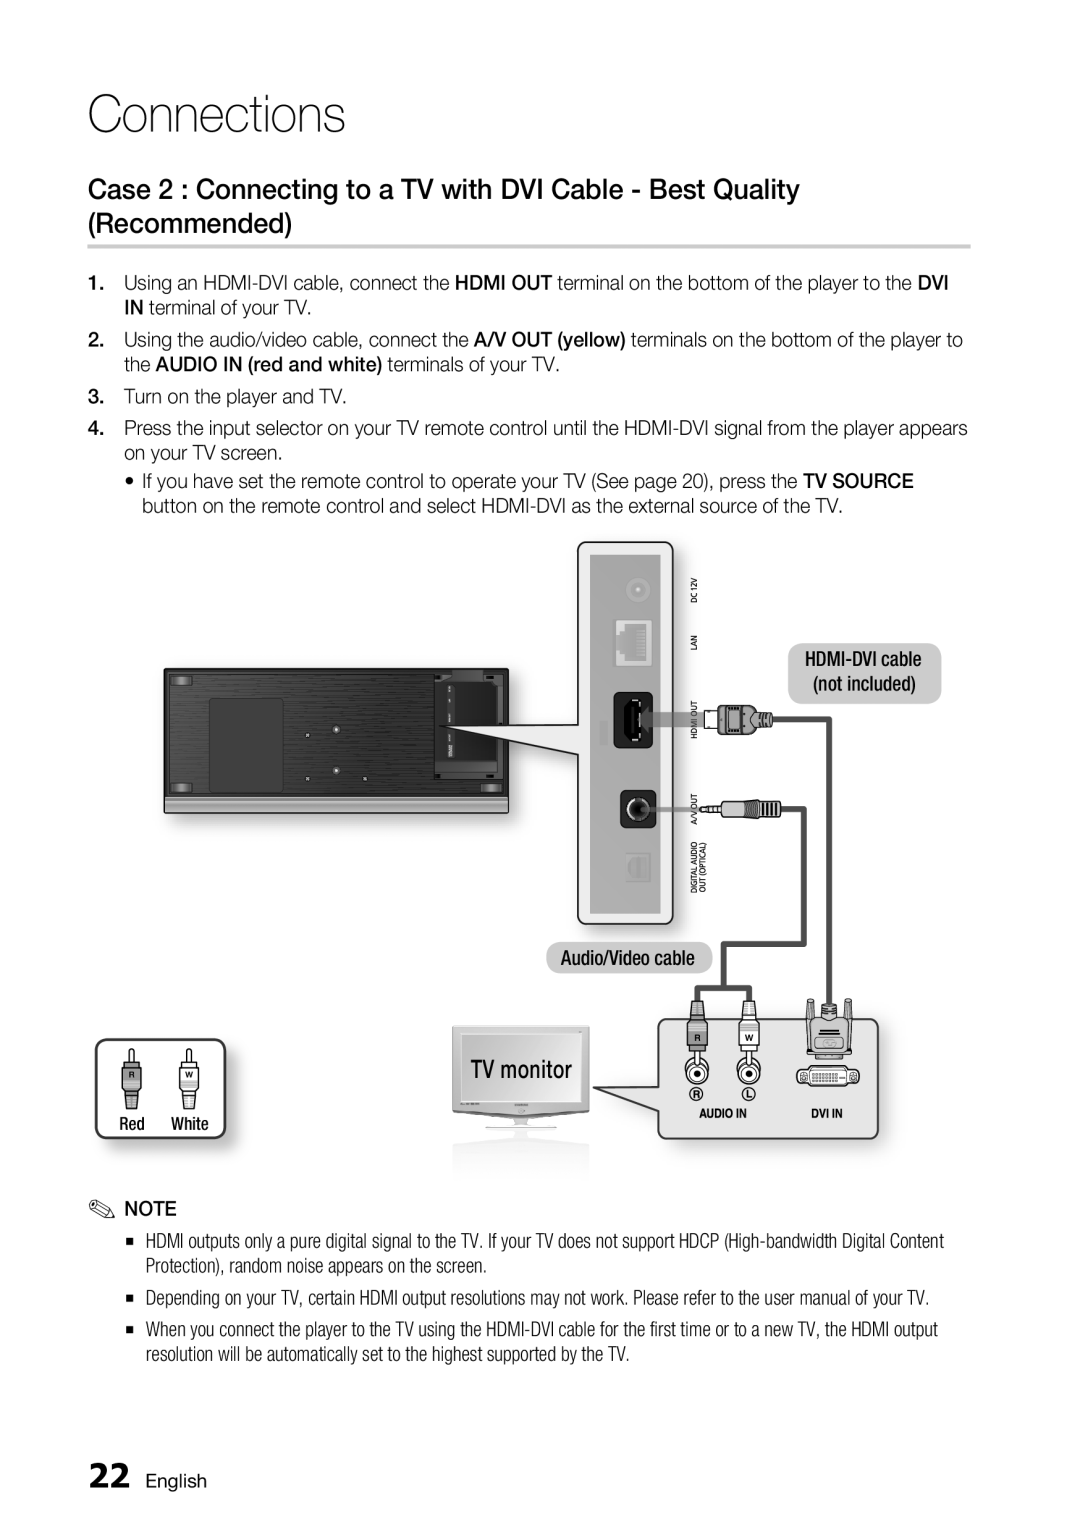 Samsung BD-C7500/EDC manual Case 2 Connecting to a TV with DVI Cable - Best Quality Recommended, TV monitor, Connections 